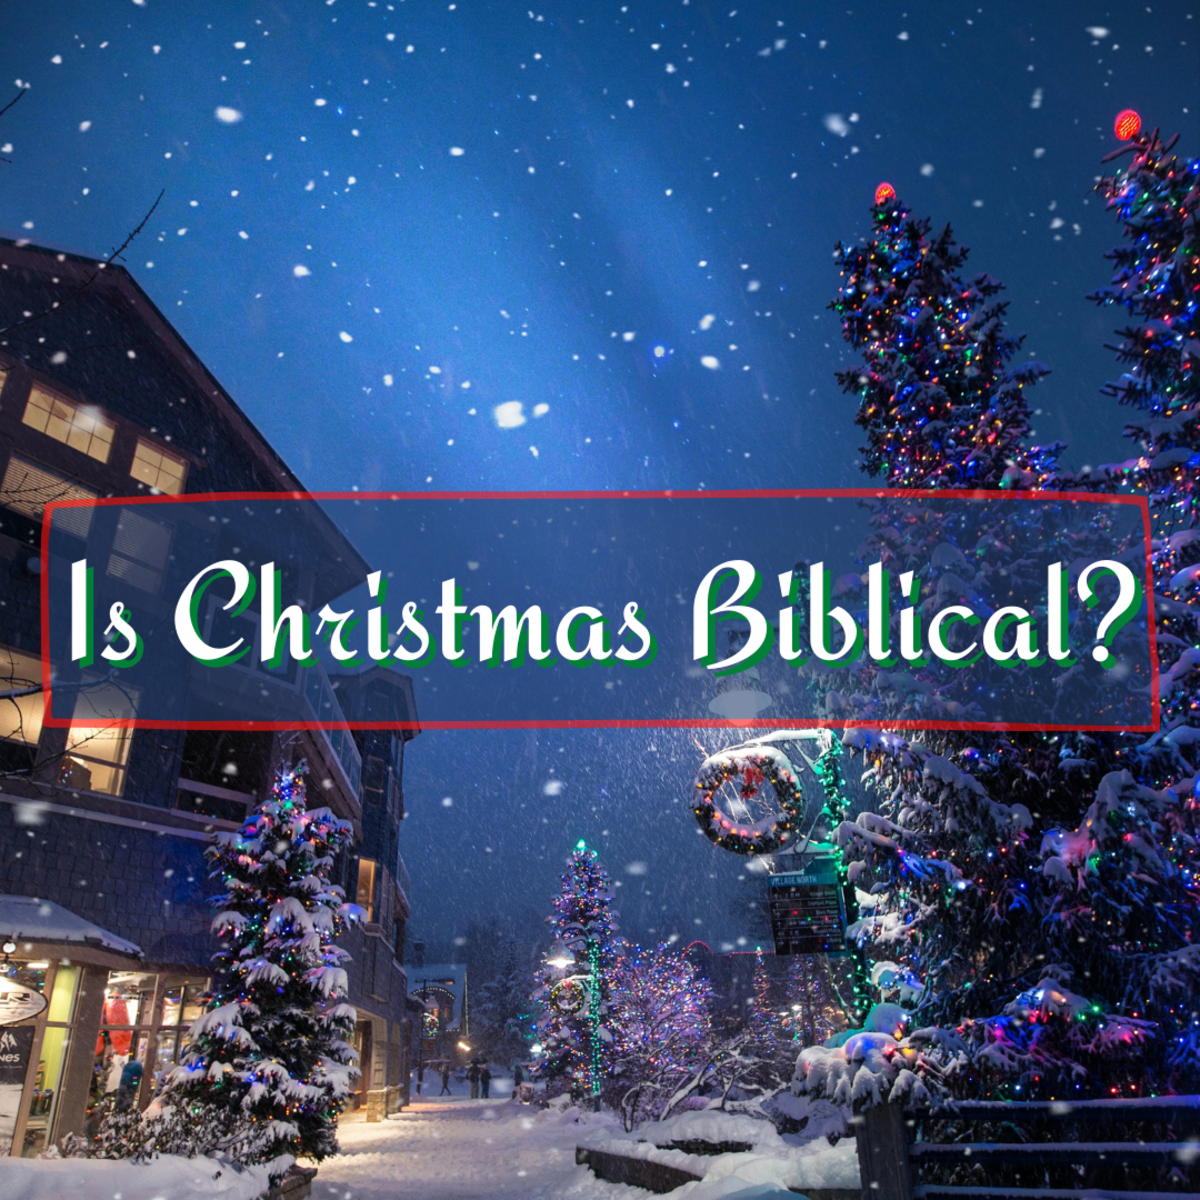 Is Christmas in the Bible? Many believers and non-believers alike have pondered this question. It turns out, Christmas might not be as Christian as many assume! Read on to learn more.